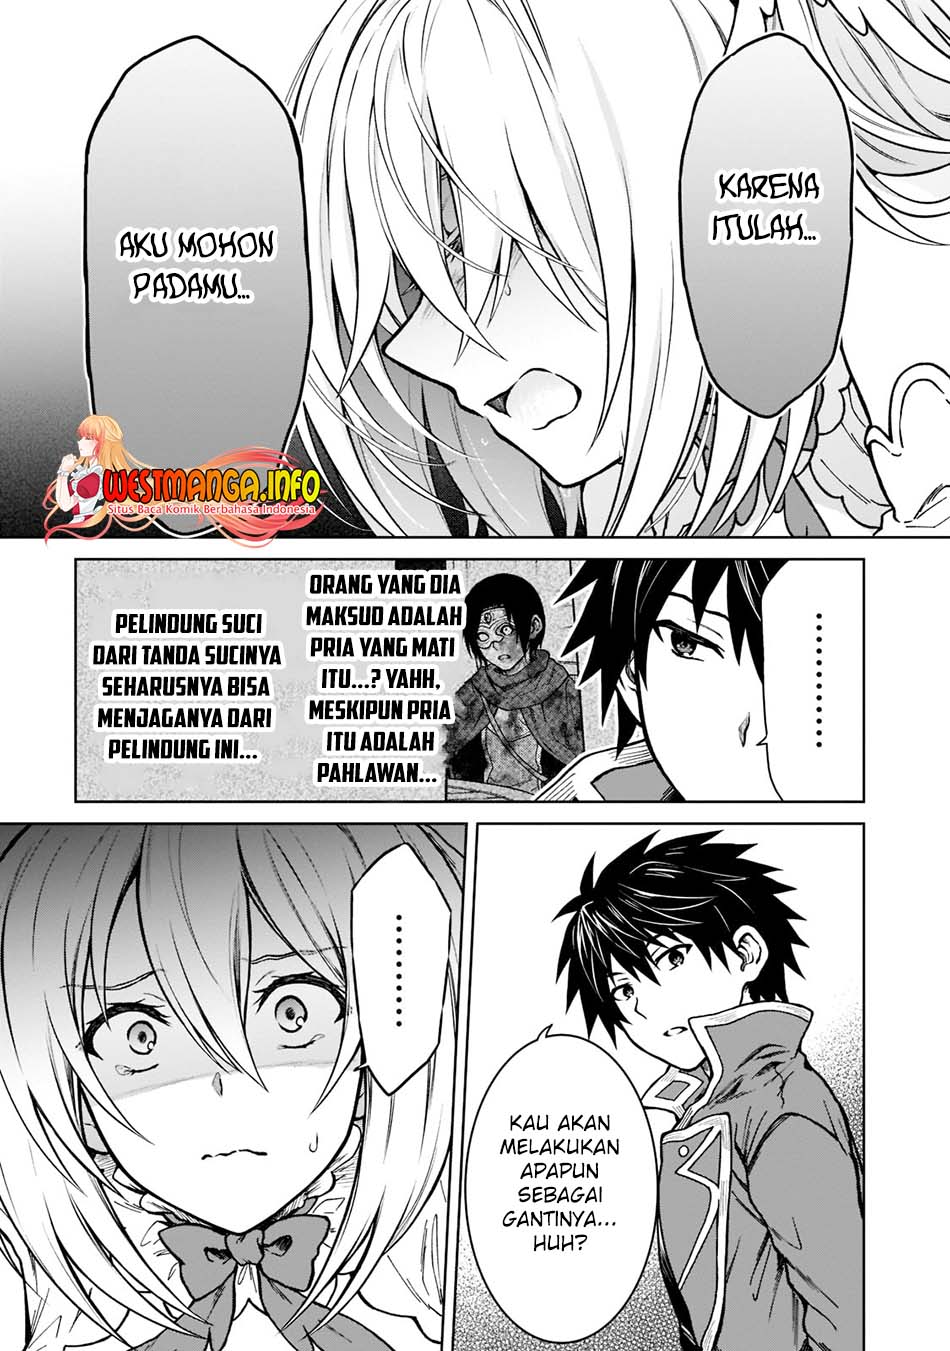 Dilarang COPAS - situs resmi www.mangacanblog.com - Komik d rank adventurer invited by a brave party and the stalking princess 011 - chapter 11 12 Indonesia d rank adventurer invited by a brave party and the stalking princess 011 - chapter 11 Terbaru 15|Baca Manga Komik Indonesia|Mangacan